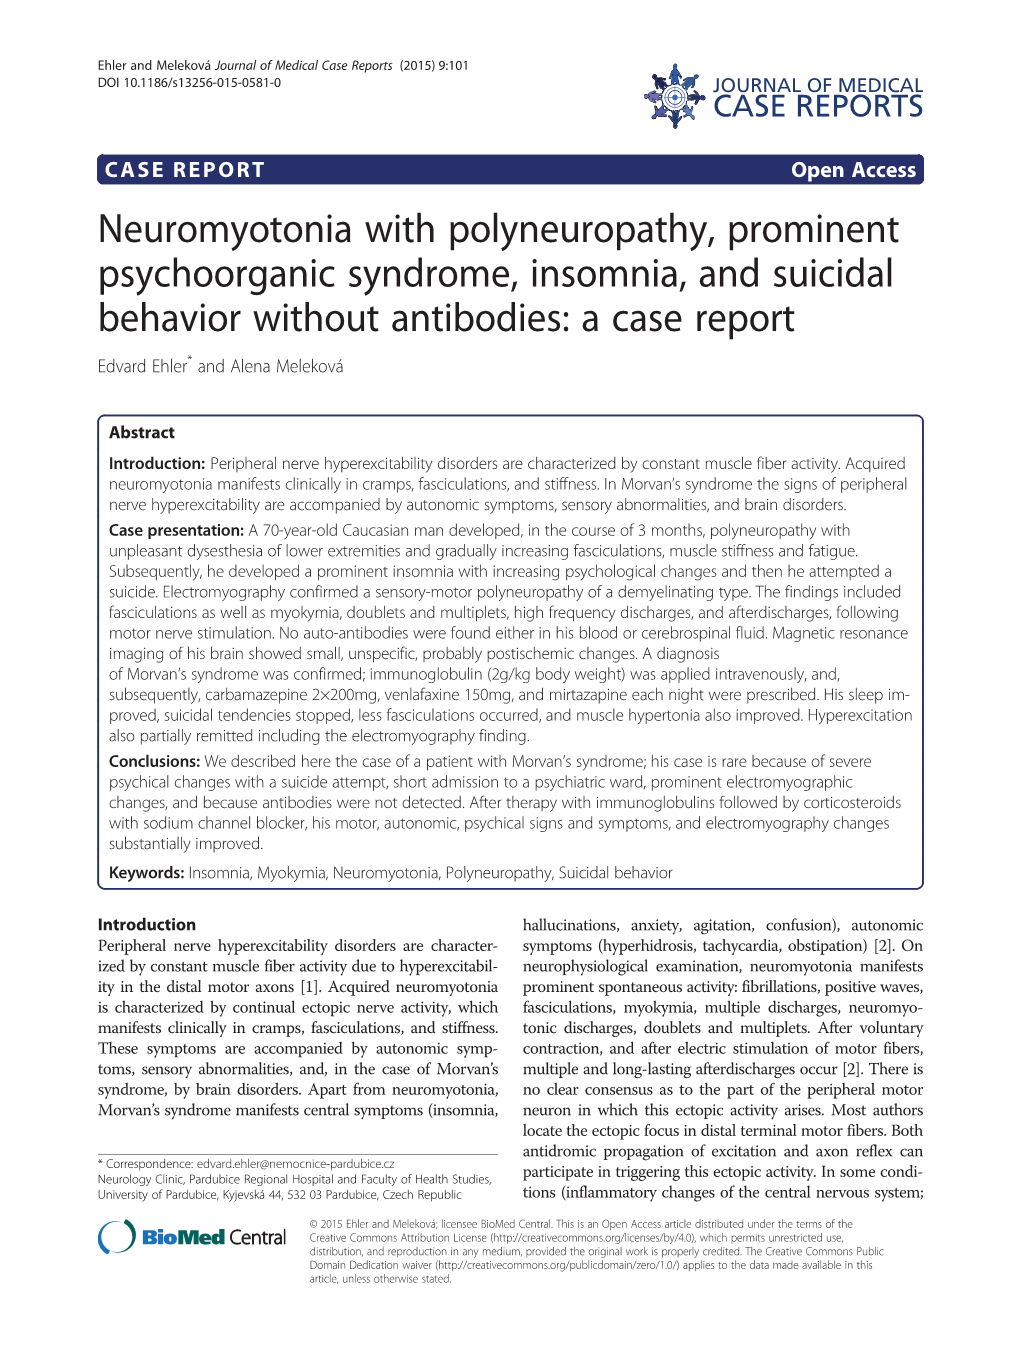 Neuromyotonia with Polyneuropathy, Prominent Psychoorganic Syndrome